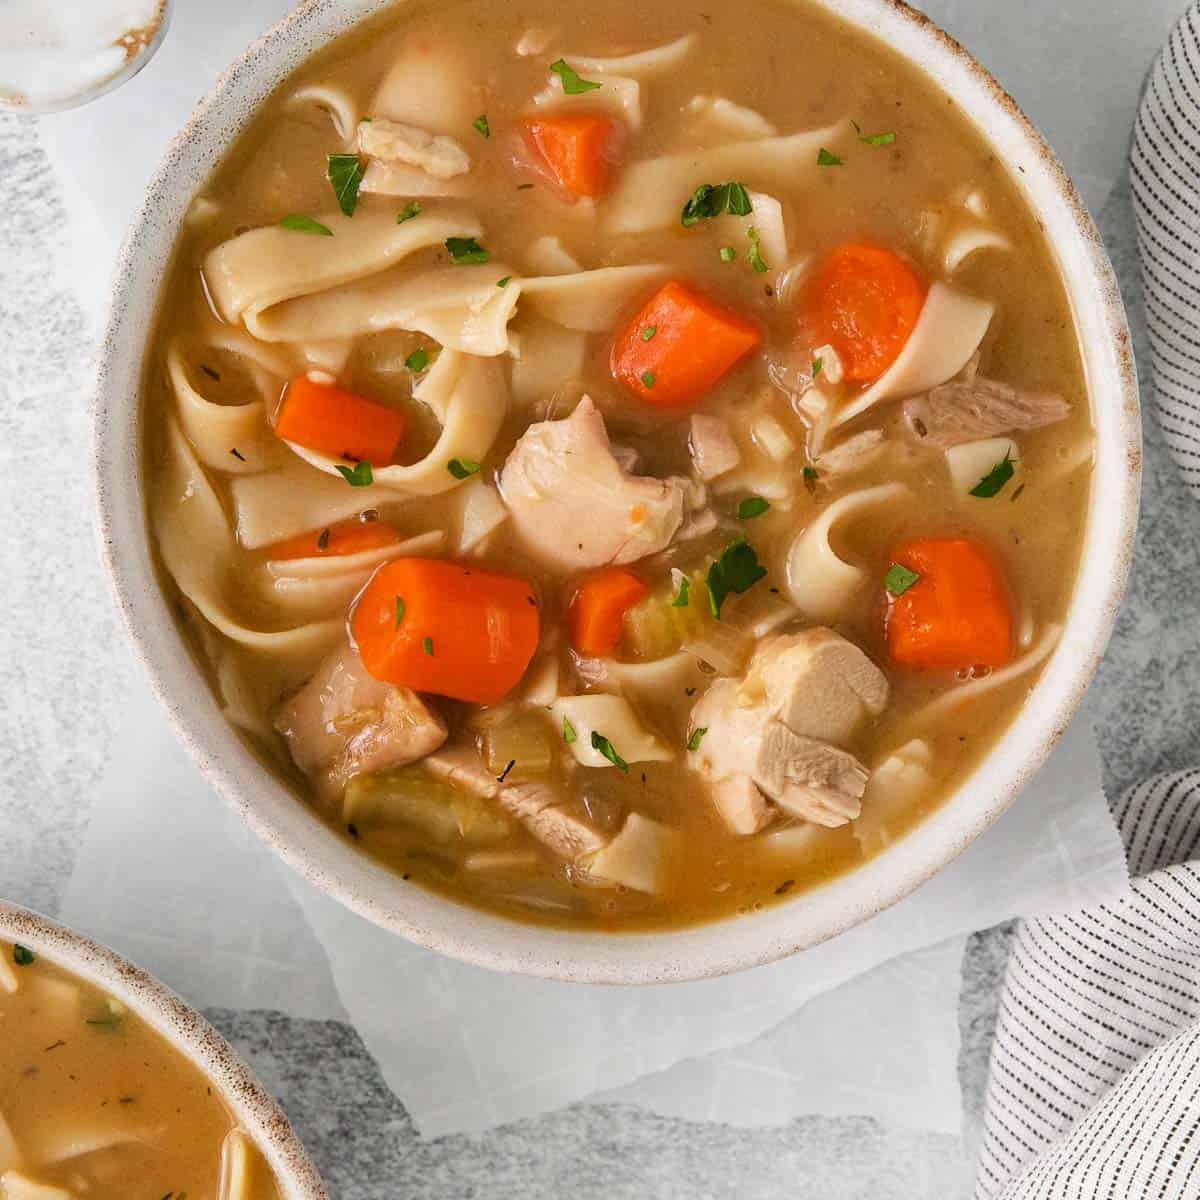 Gluten Free Chicken Noodle Soup - All the Healthy Things